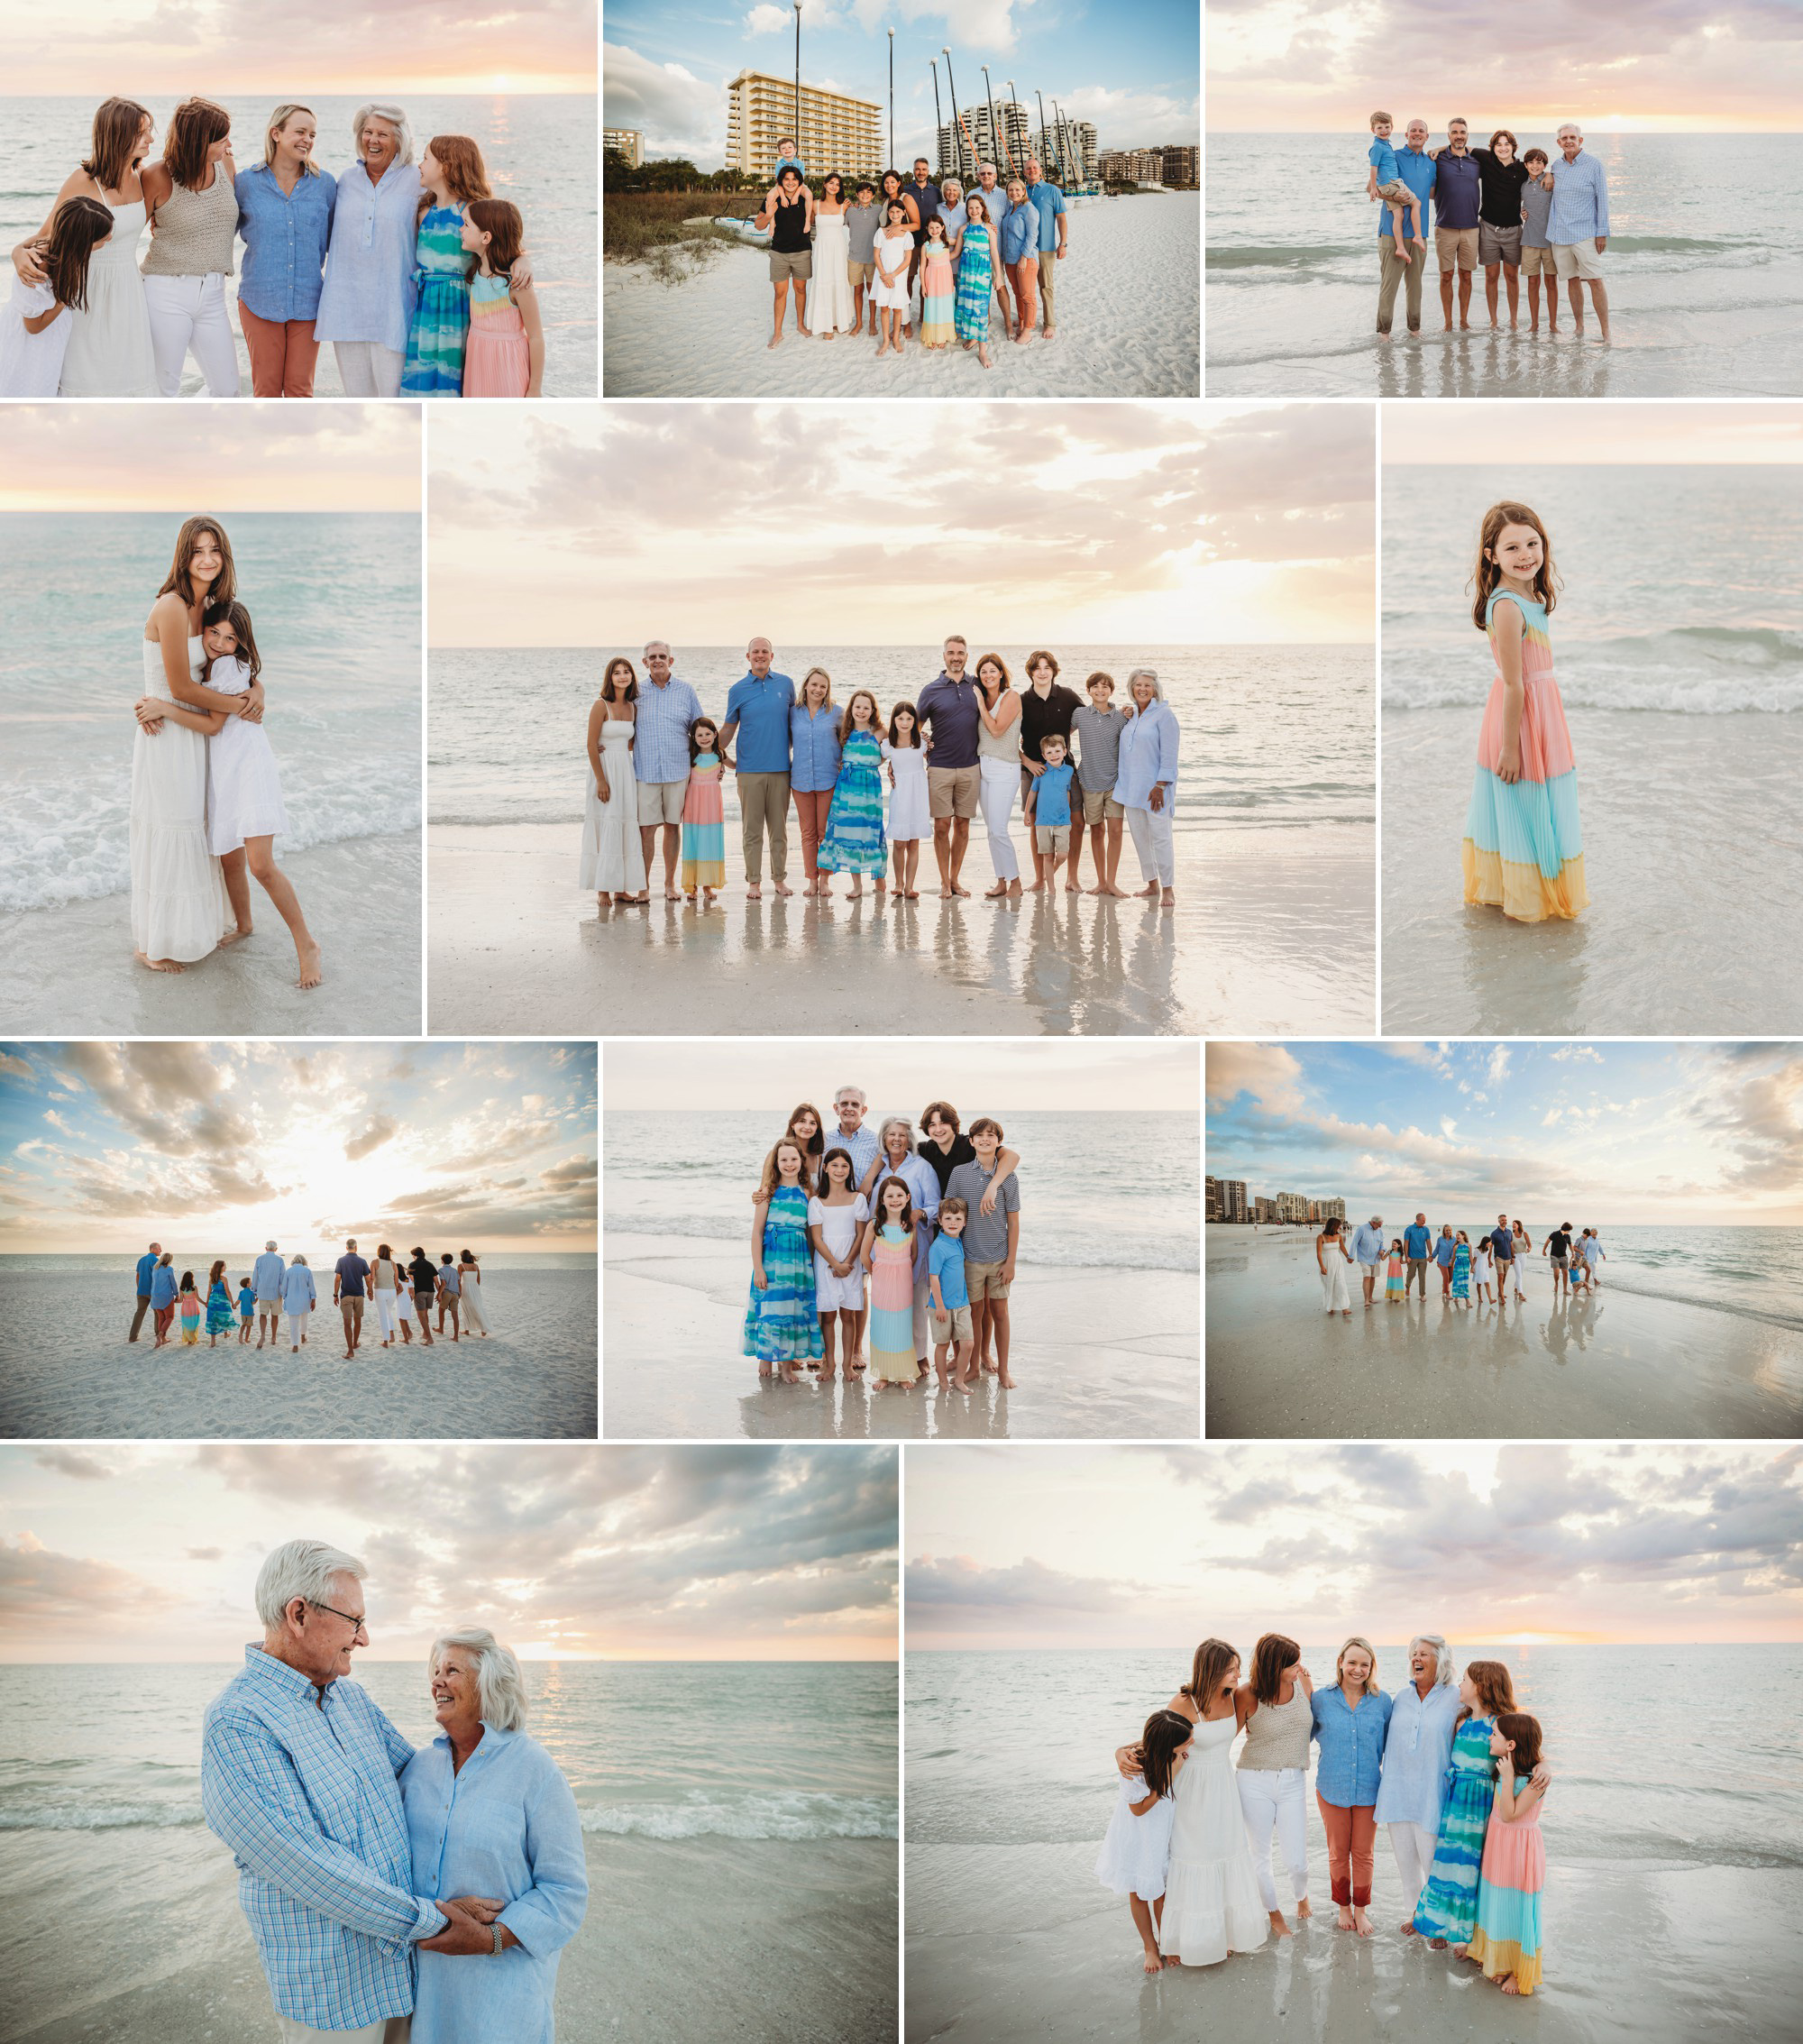 A family photo shoot on the beach of the Crystal Shores Marriott on Marco Island. Beautiful beach and sunset views serve as the perfect backdrop.